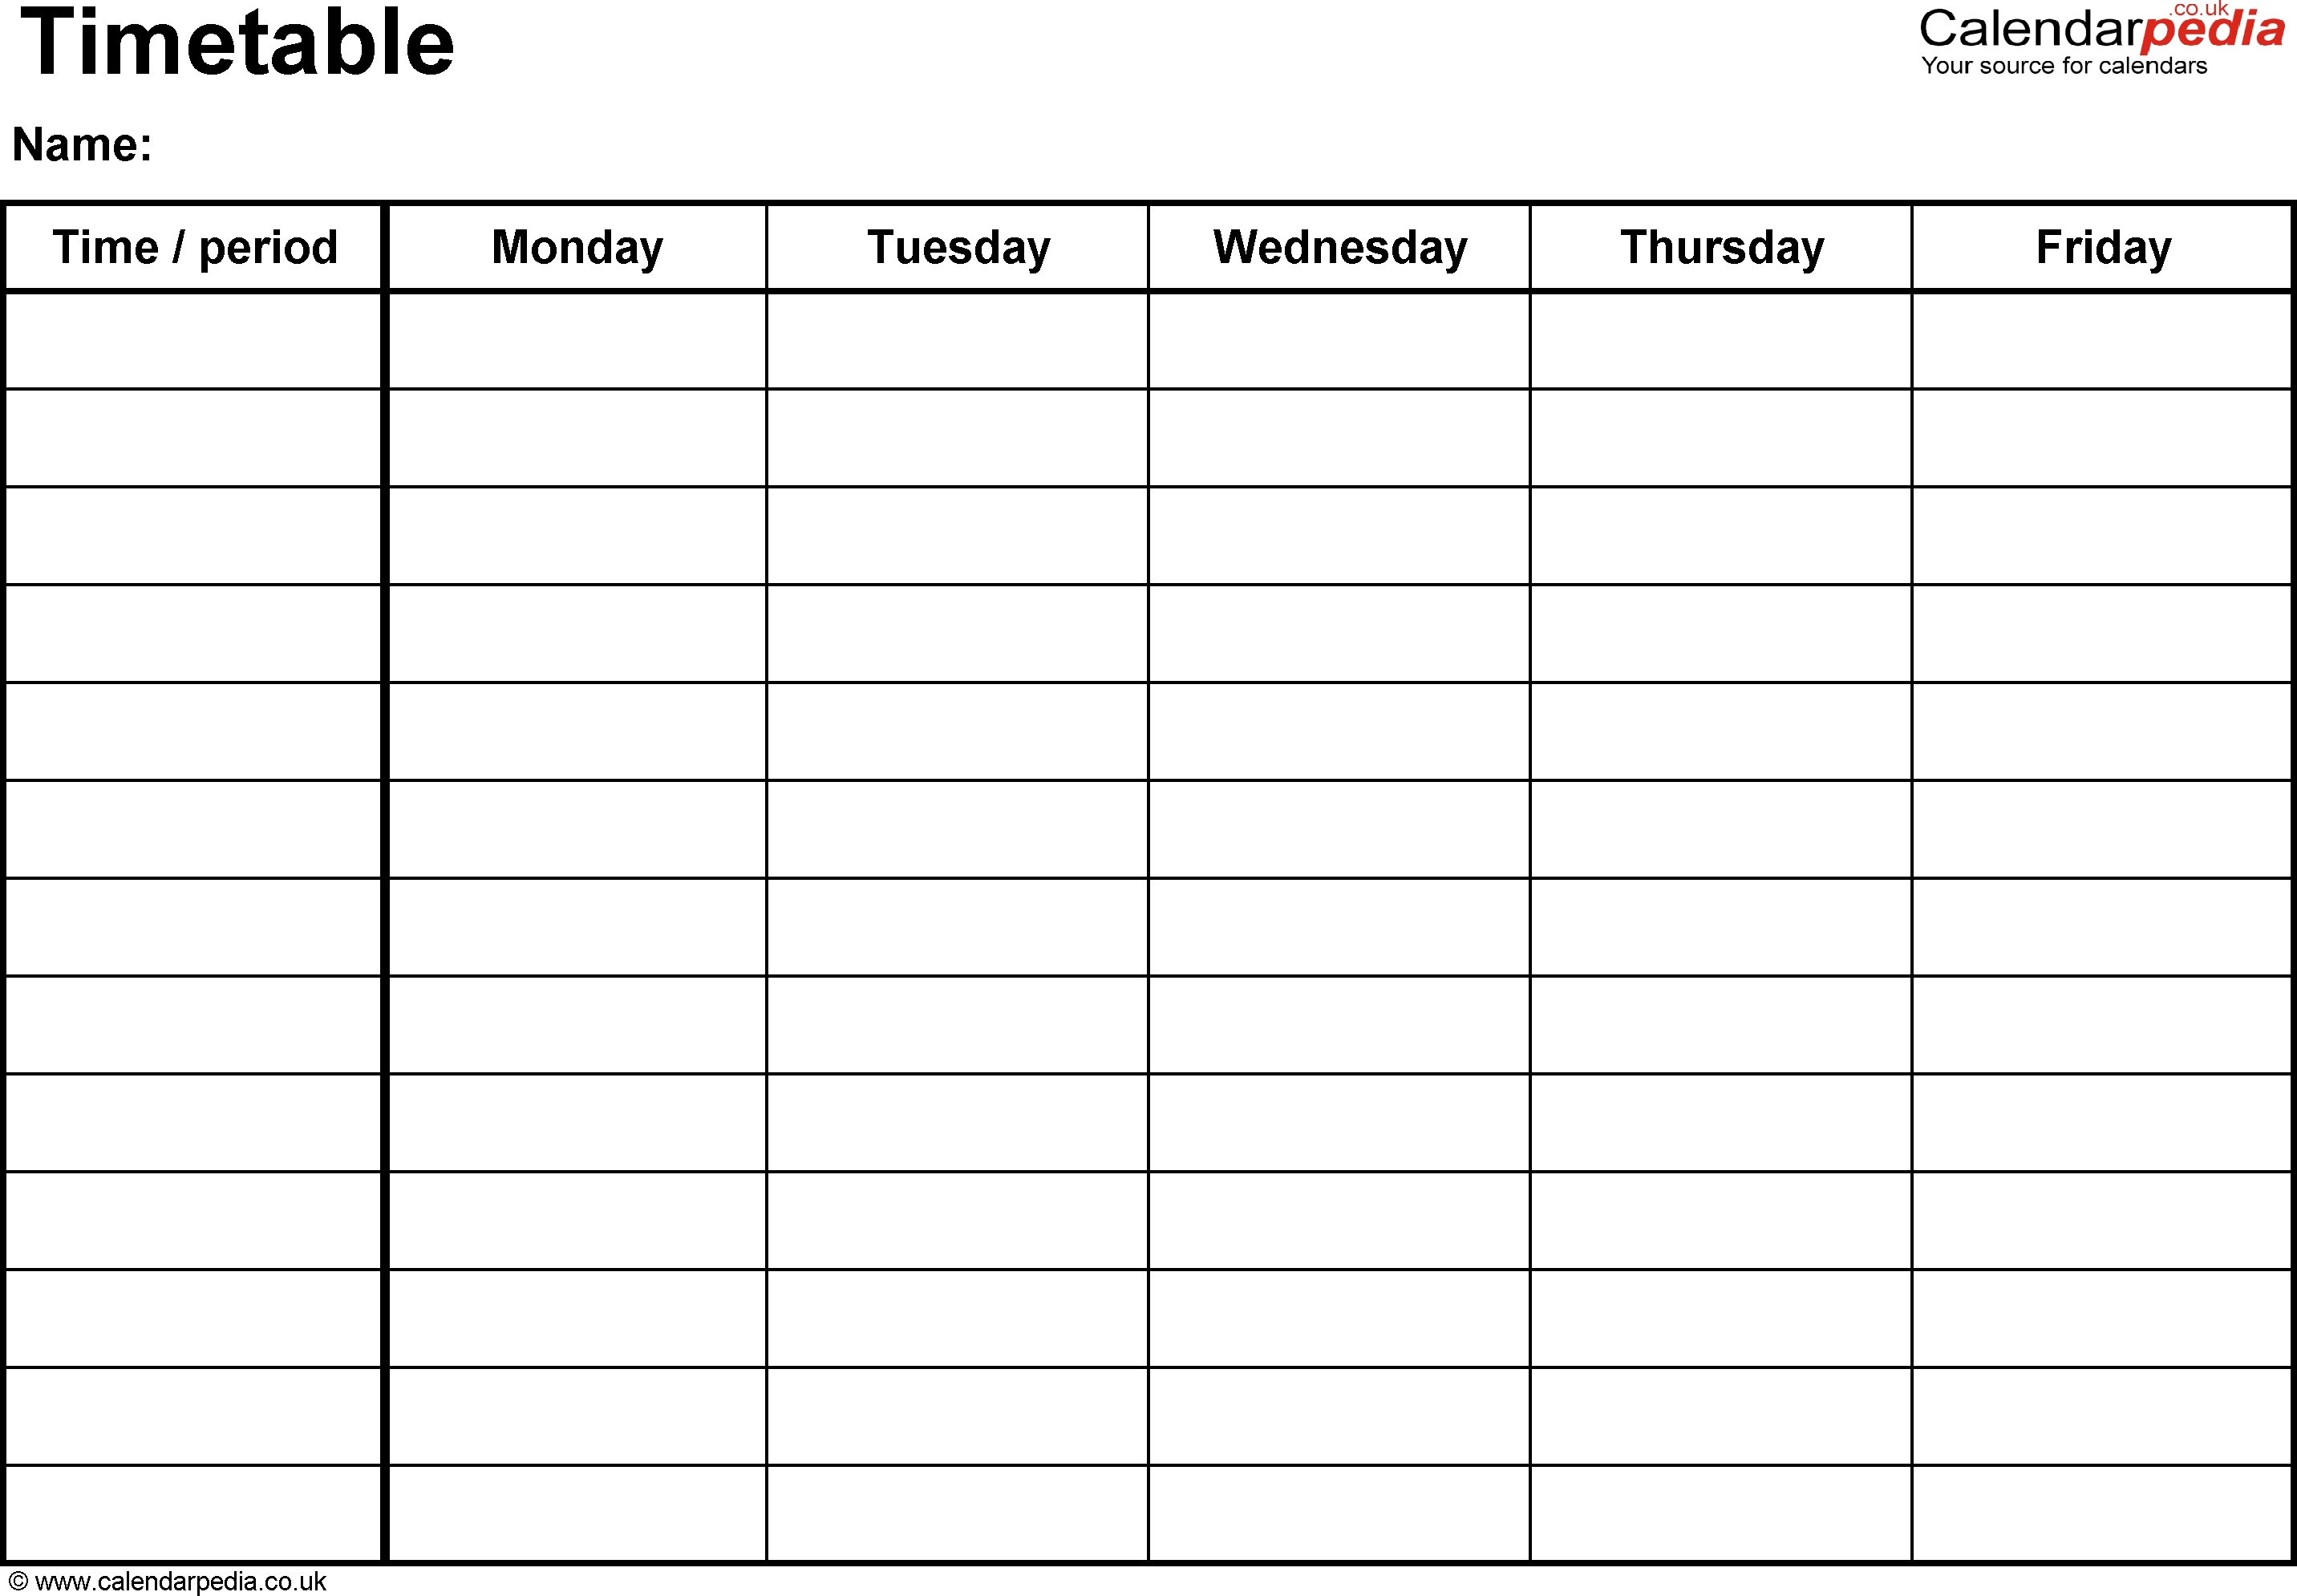 Excel Timetable Template 1: Landscape Format, A4, 1 Page Blank Monday Through Friday Schedule Word